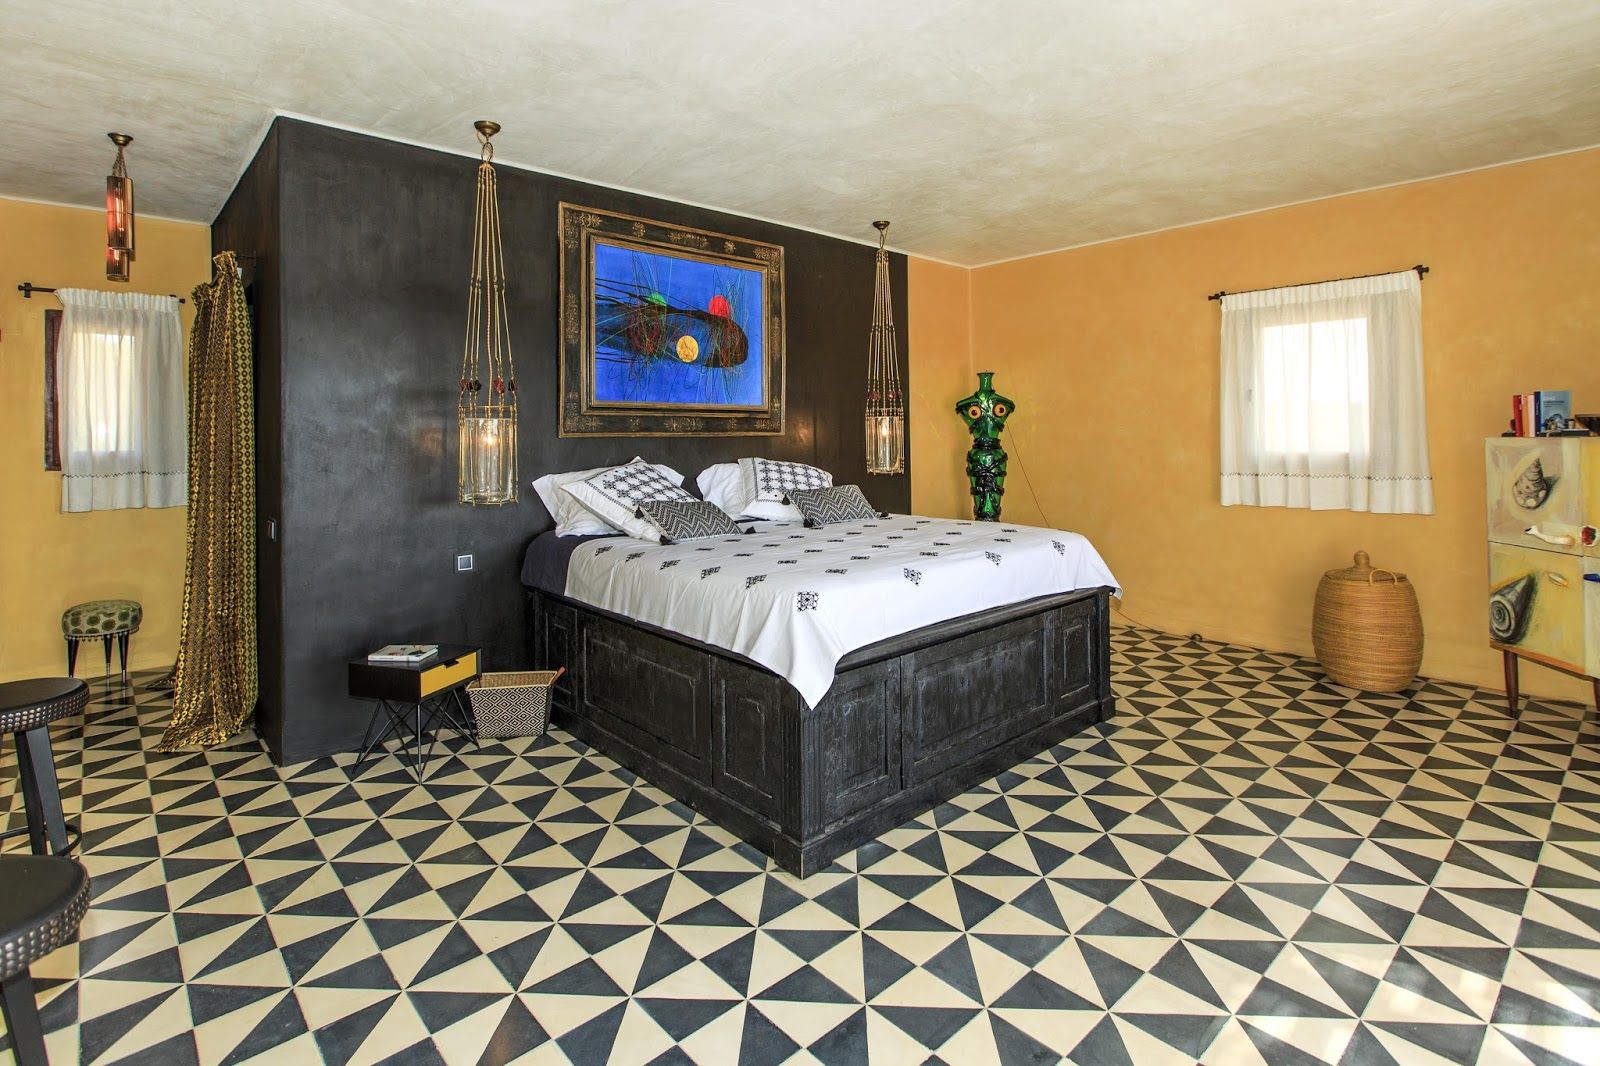 New Customer photos of cement tiles, Crafted Tiles Crafted Tiles Mediterranean style bedroom